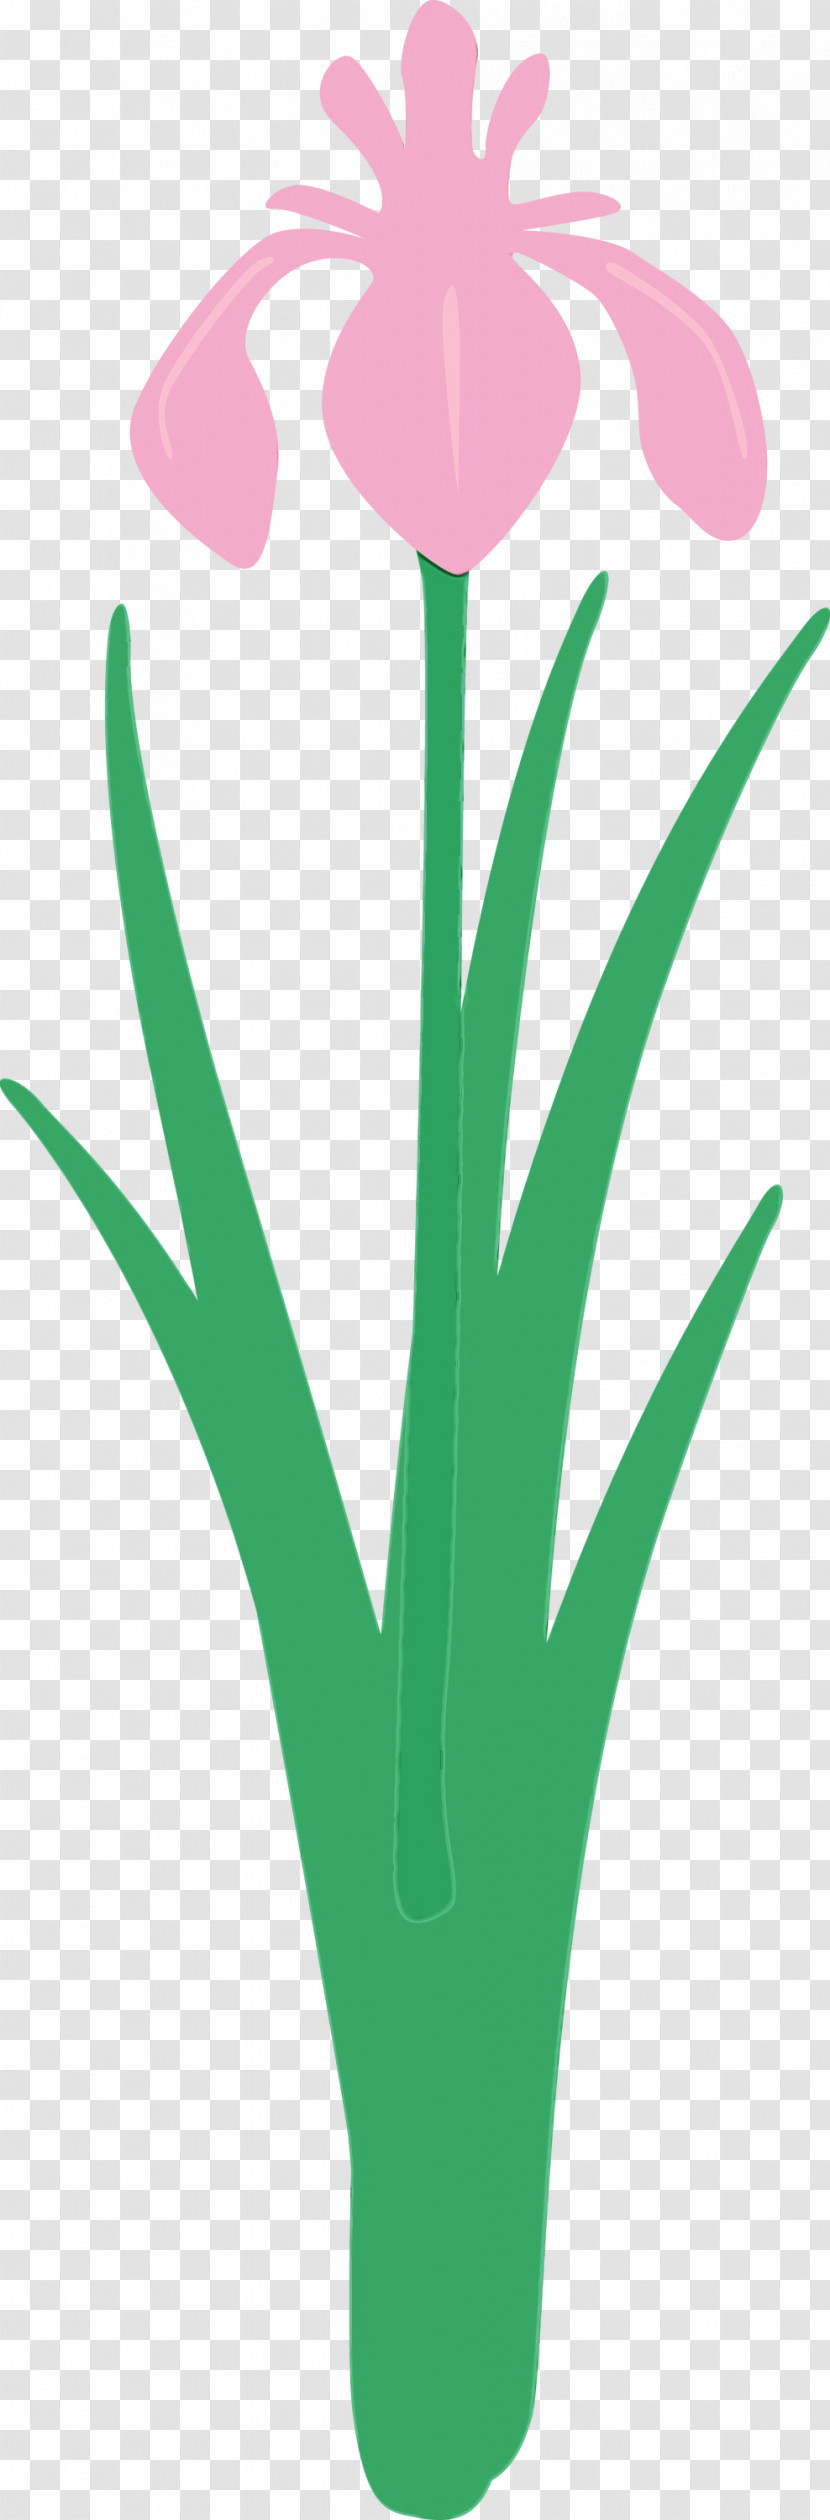 Green Leaf Grass Grass Family Plant Transparent PNG